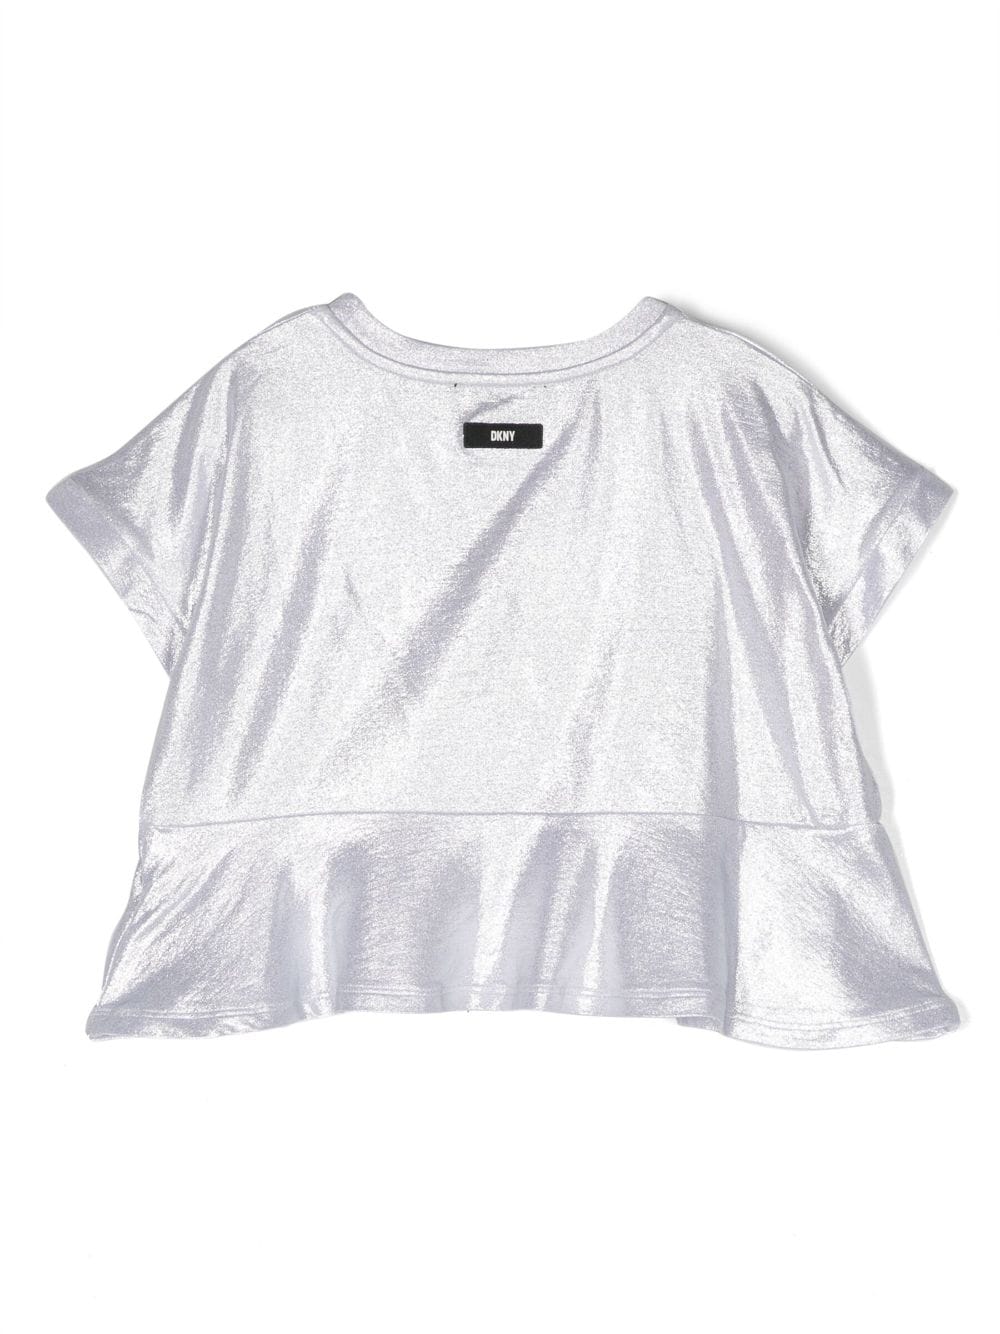 Image 2 of Dkny Kids embroidered-logo glossy T-shirt